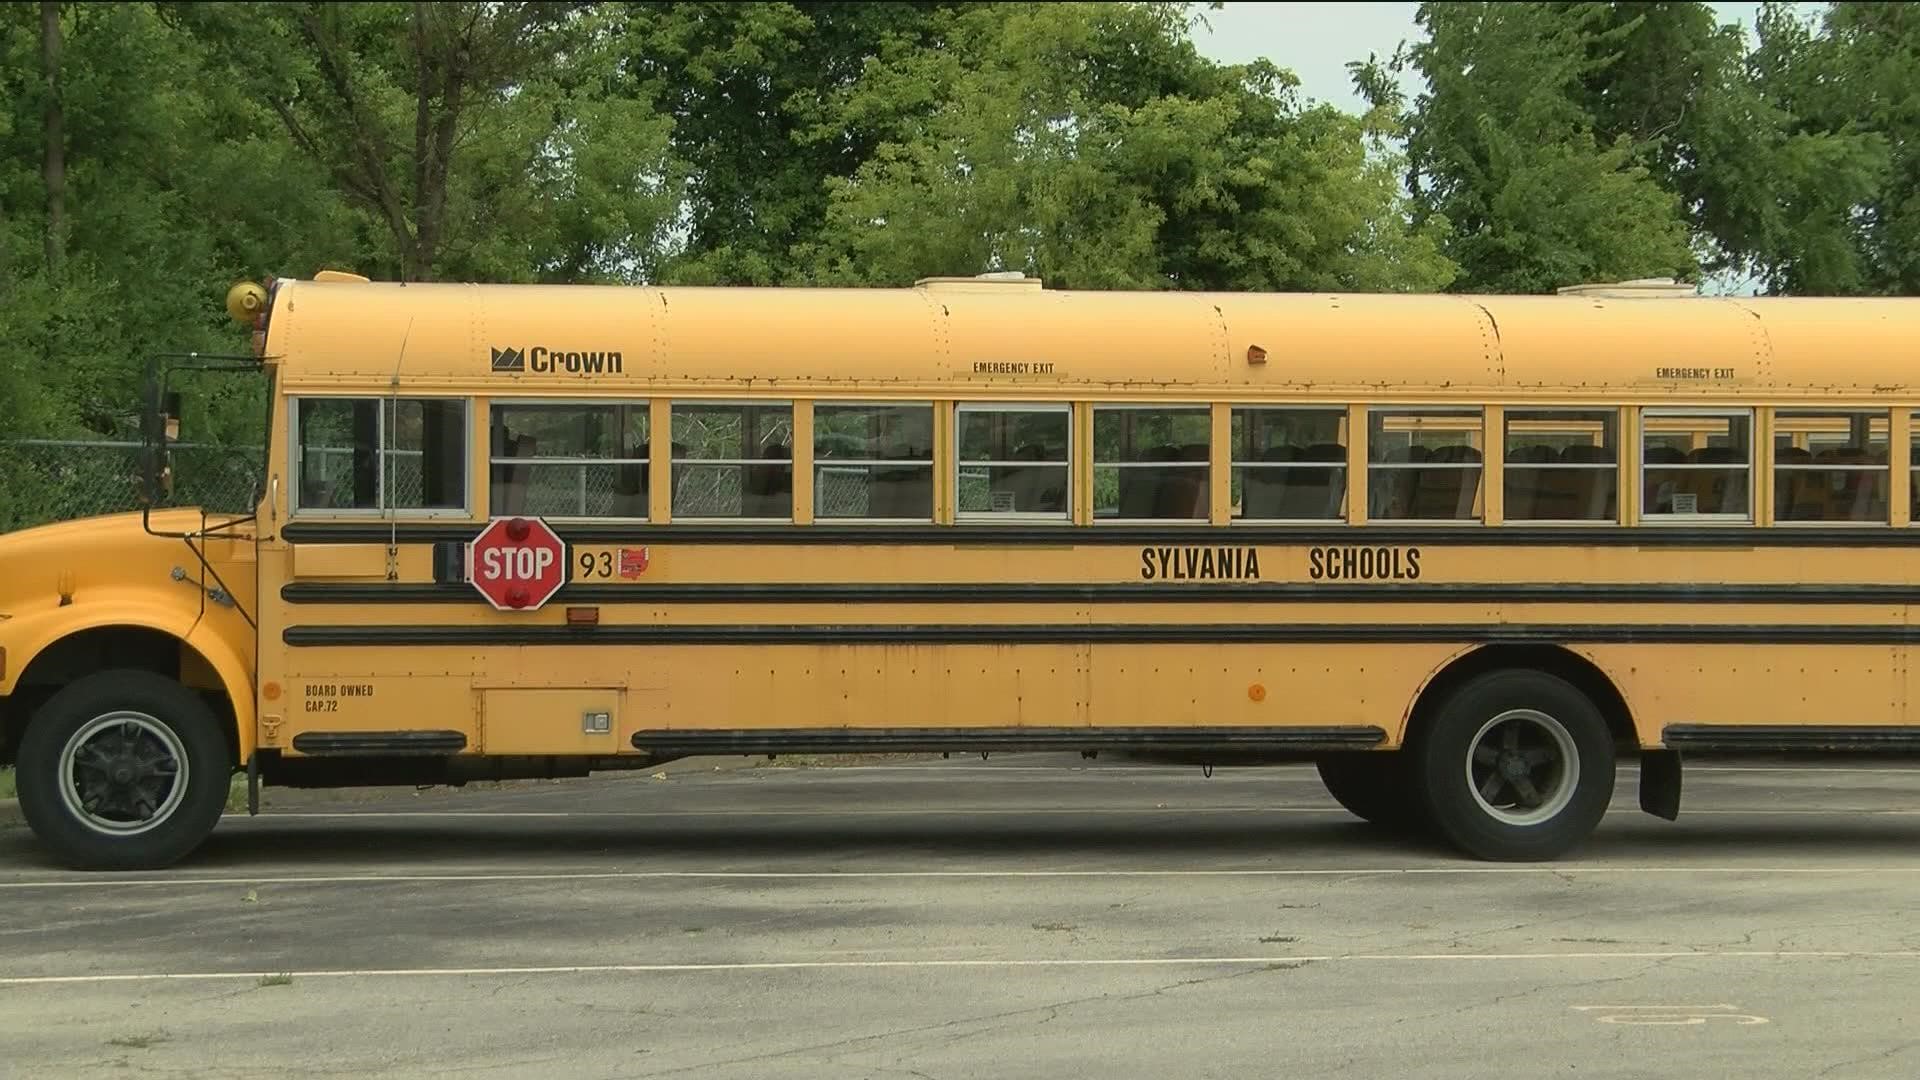 The lawsuit claims students who attend religious schools are being offered worse bussing services than those who attend Sylvania public schools.